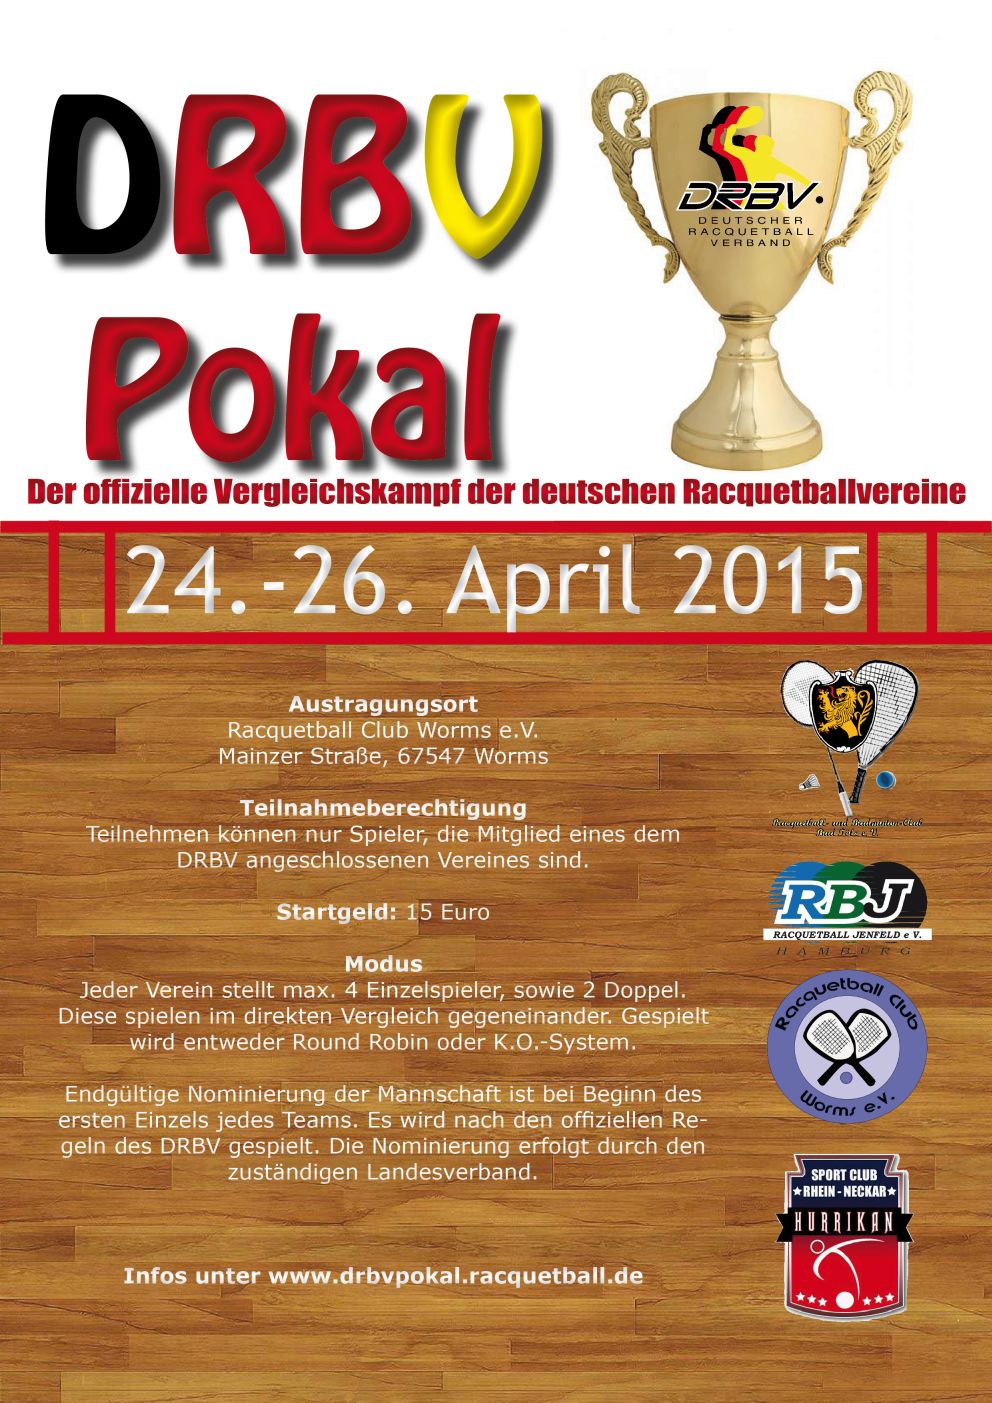 You are currently viewing DRBV Pokal 2015 in Worms